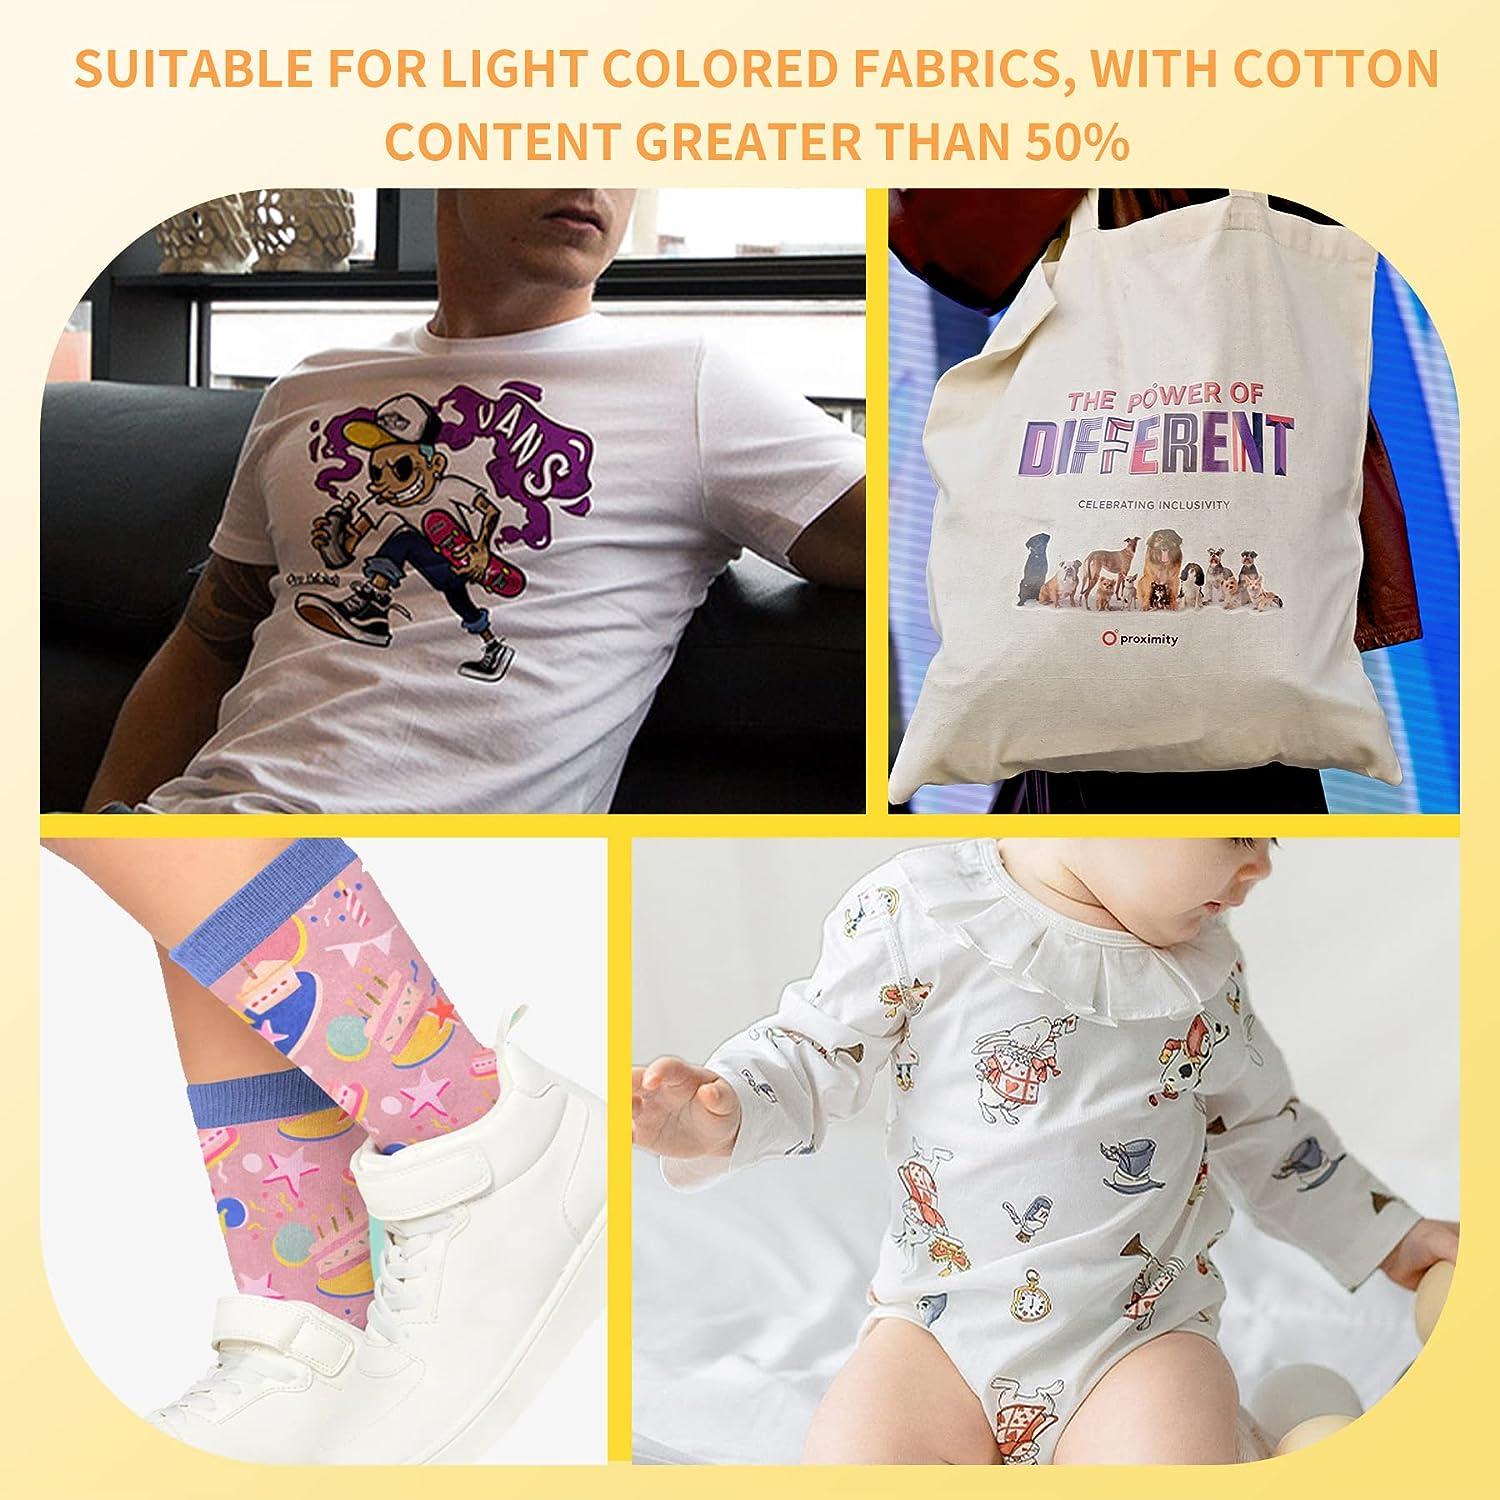 A-SUB Dark Fabric Transfer Paper 8.5''x11'' Compatible with Inkjet